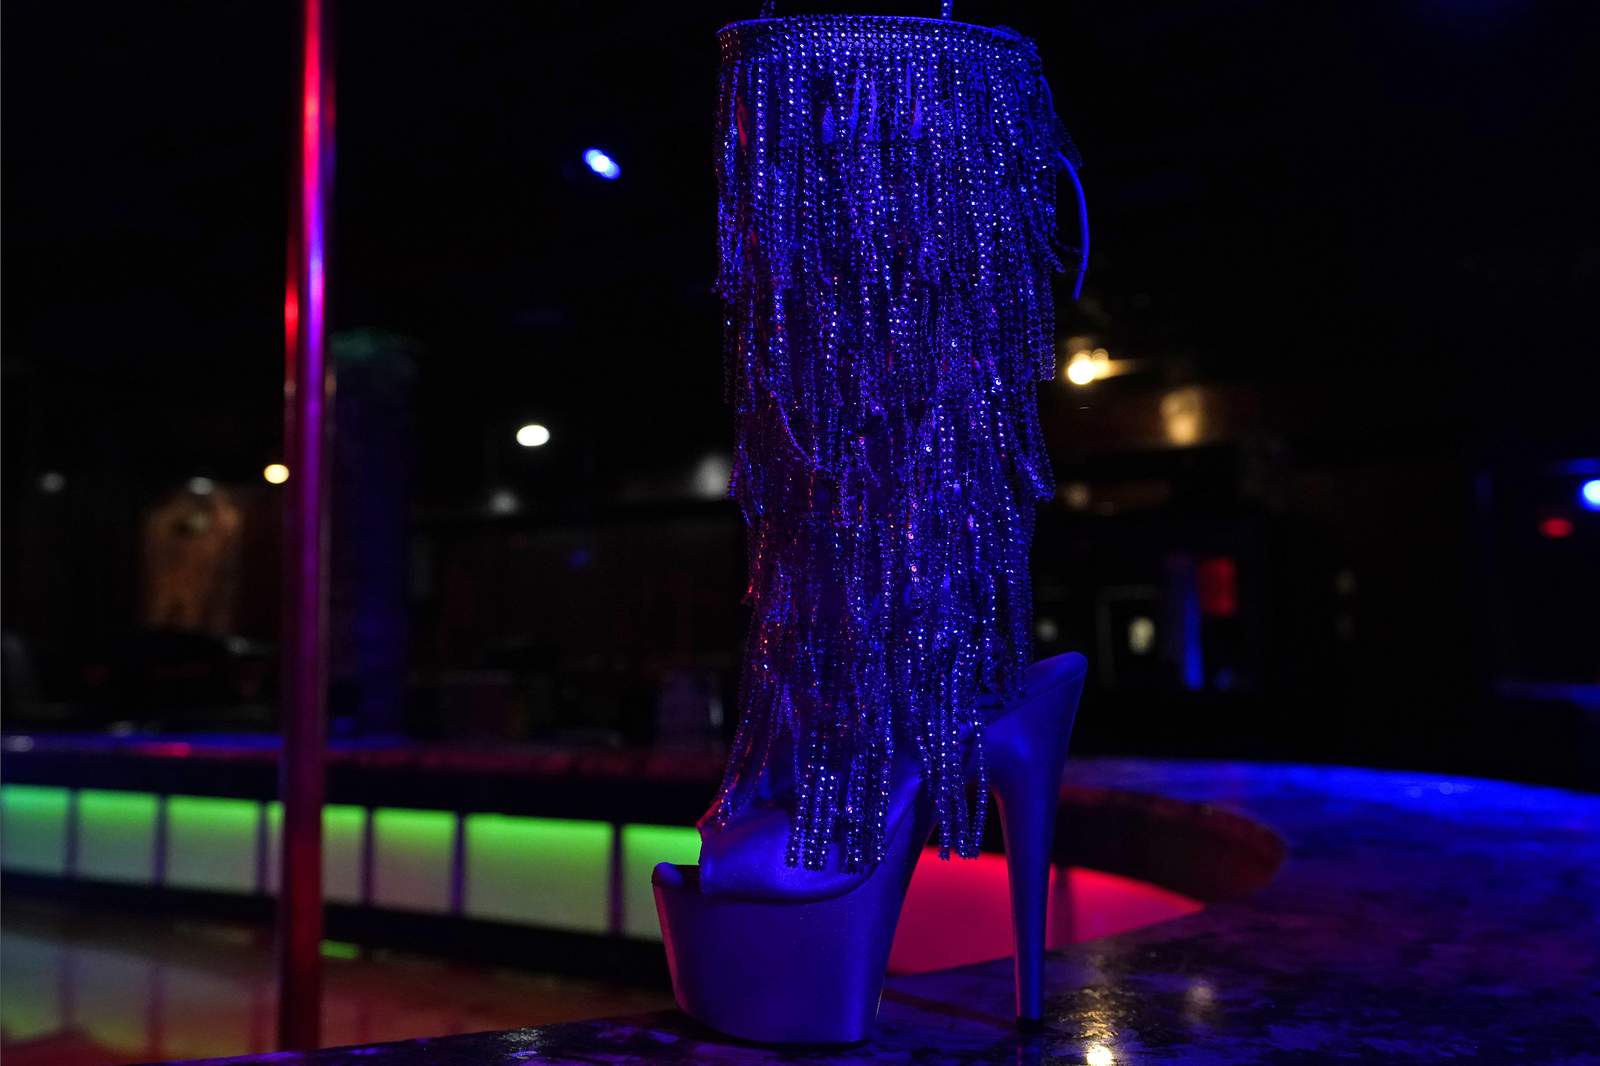 Tampa’s famed strip clubs brace for an unusual Super Bowl